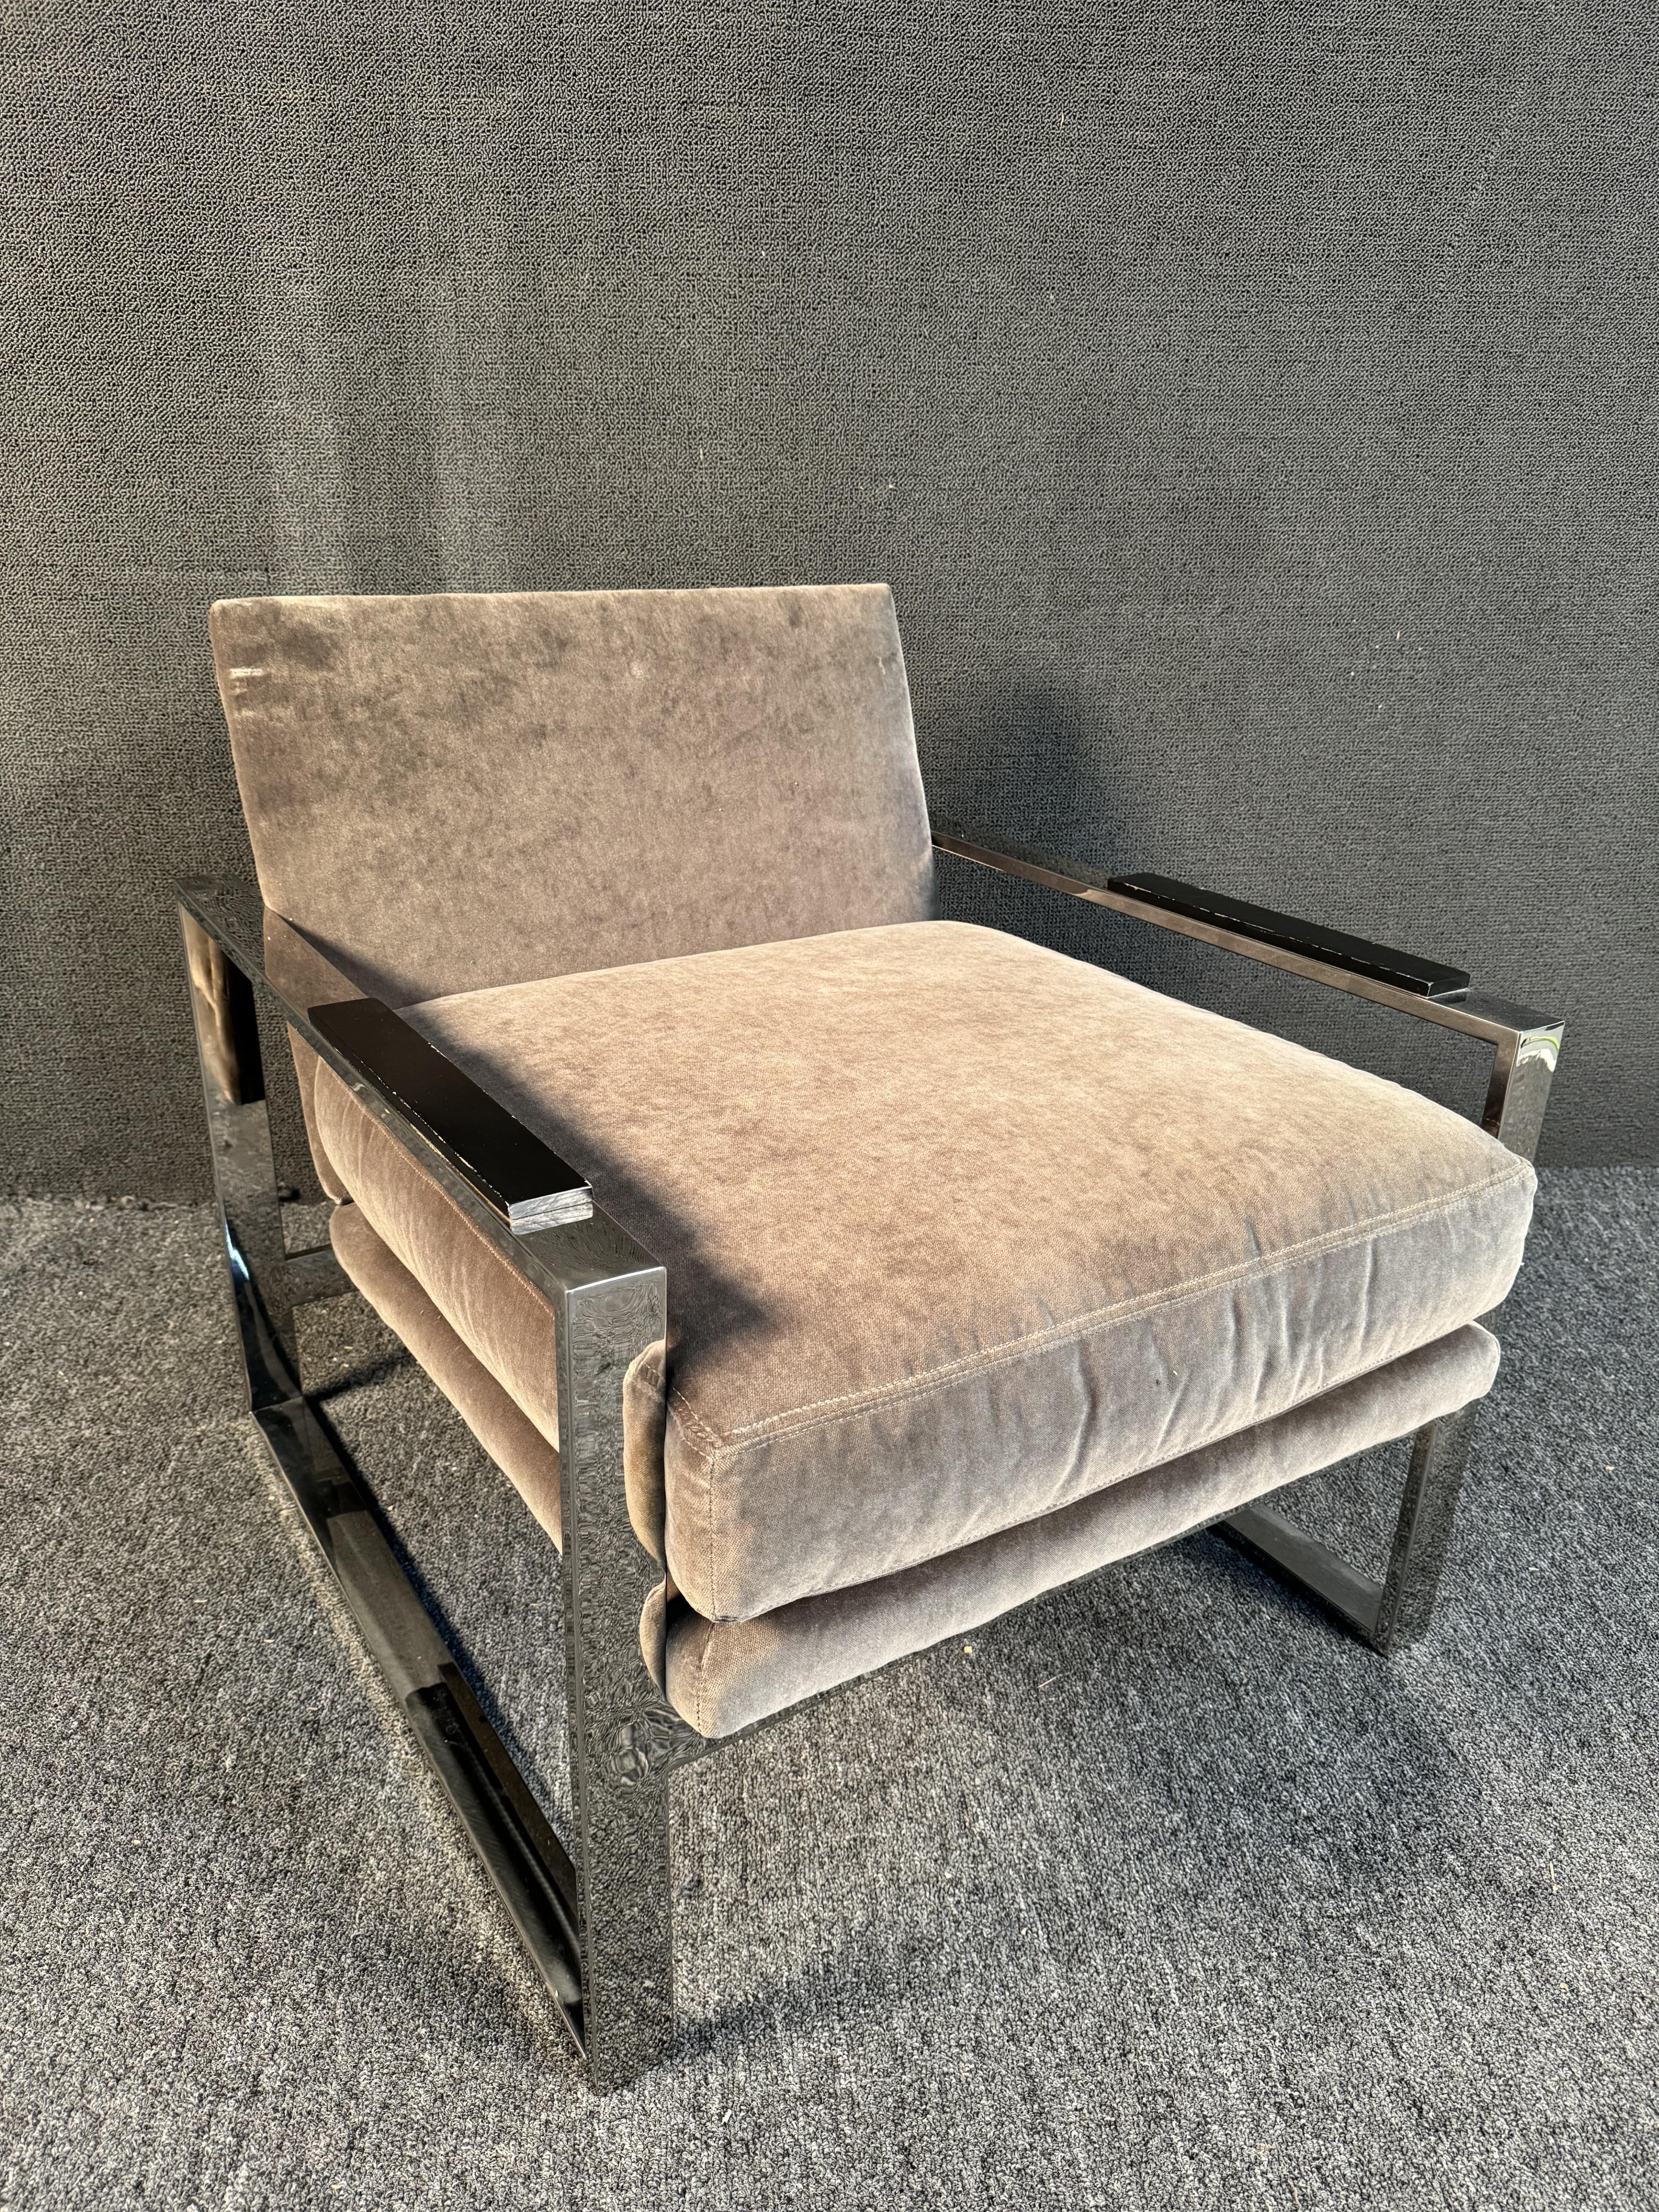 Sleek chrome lounge chair by Michael Weiss featuring wood arm rests and comfortable grey upholstery. Please confirm location (NY or NJ)